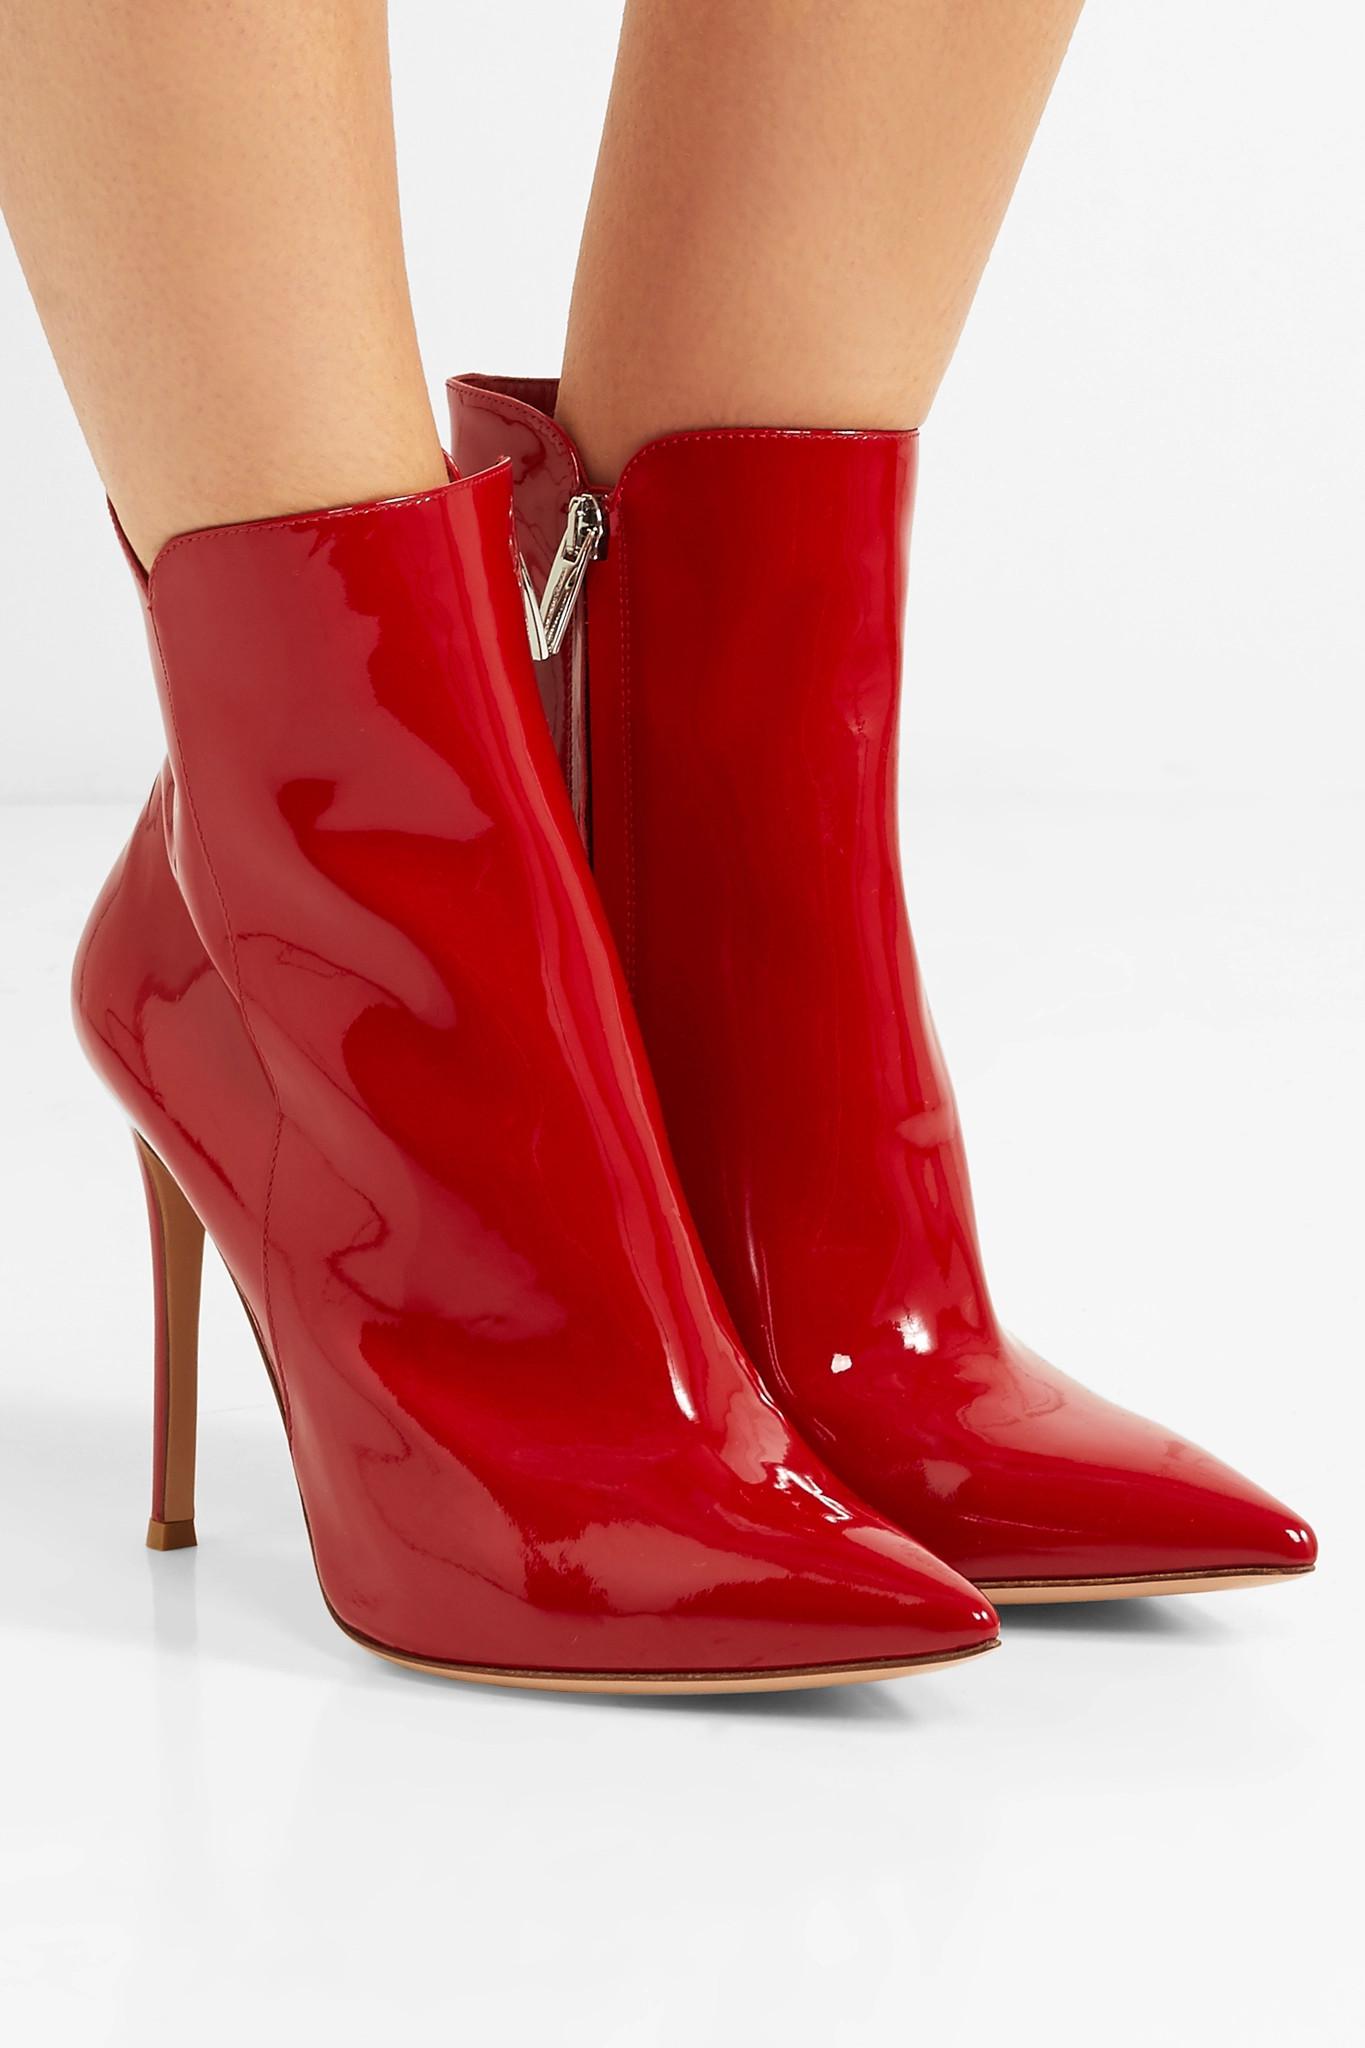 Gianvito Rossi Levy Patentleather Ankle Boots in Red Lyst